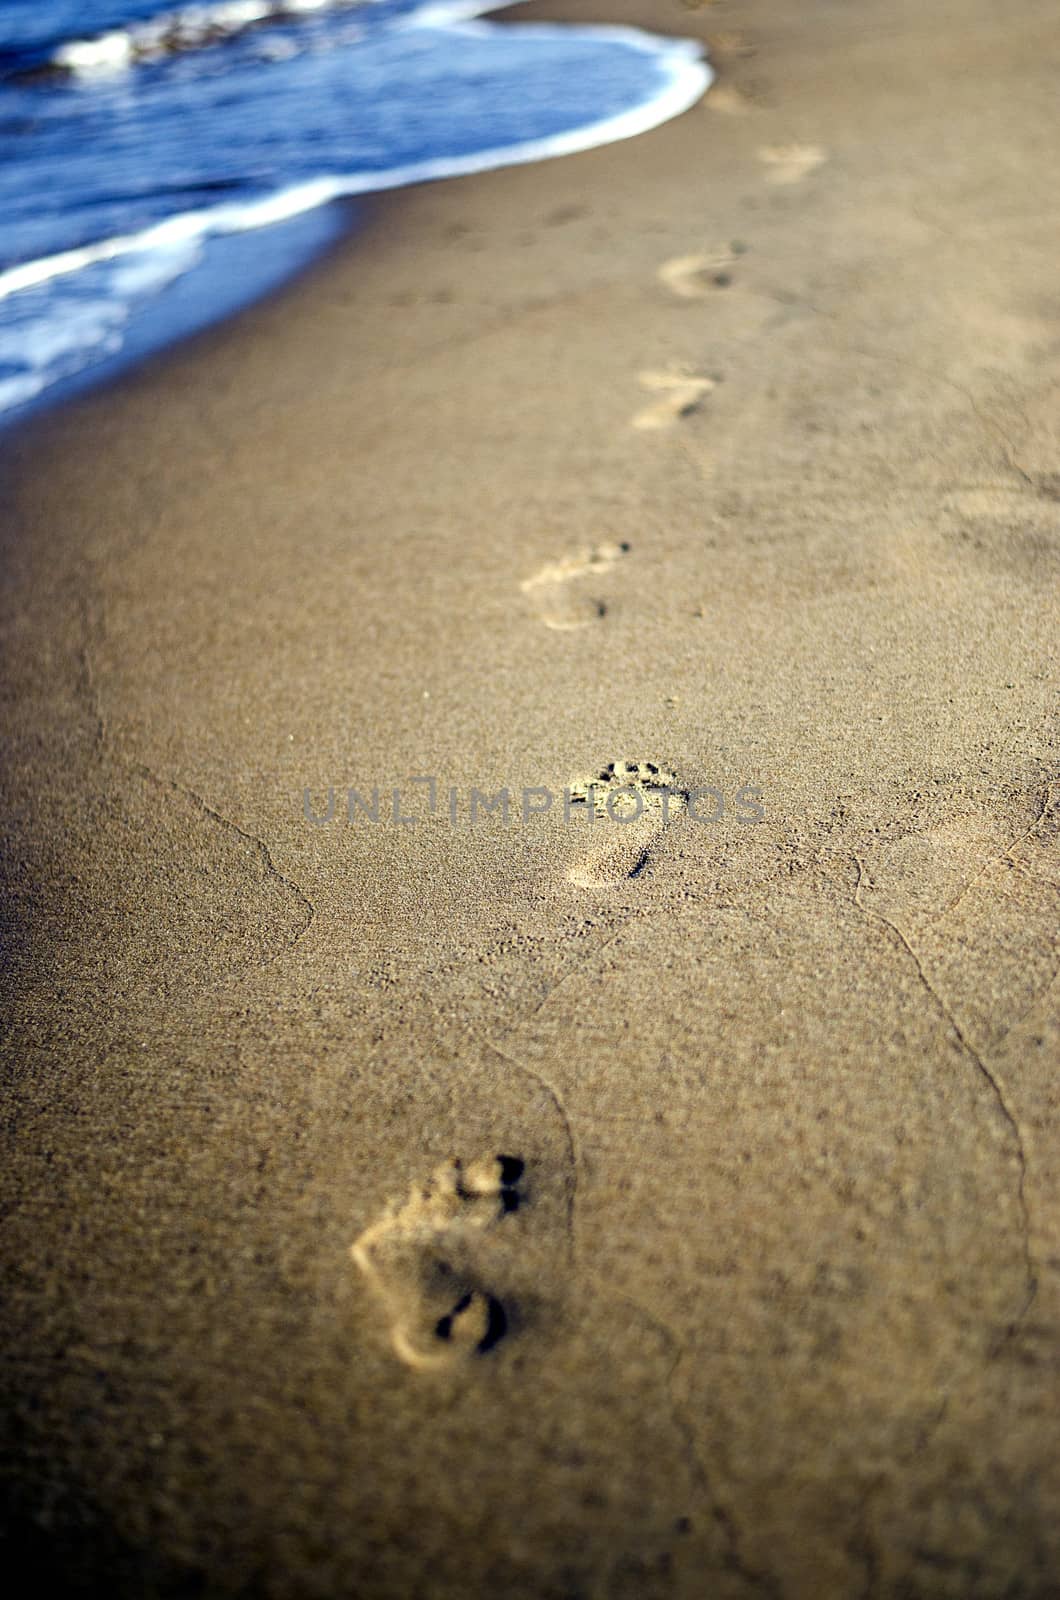 Footsteps in sand by Anzemulec